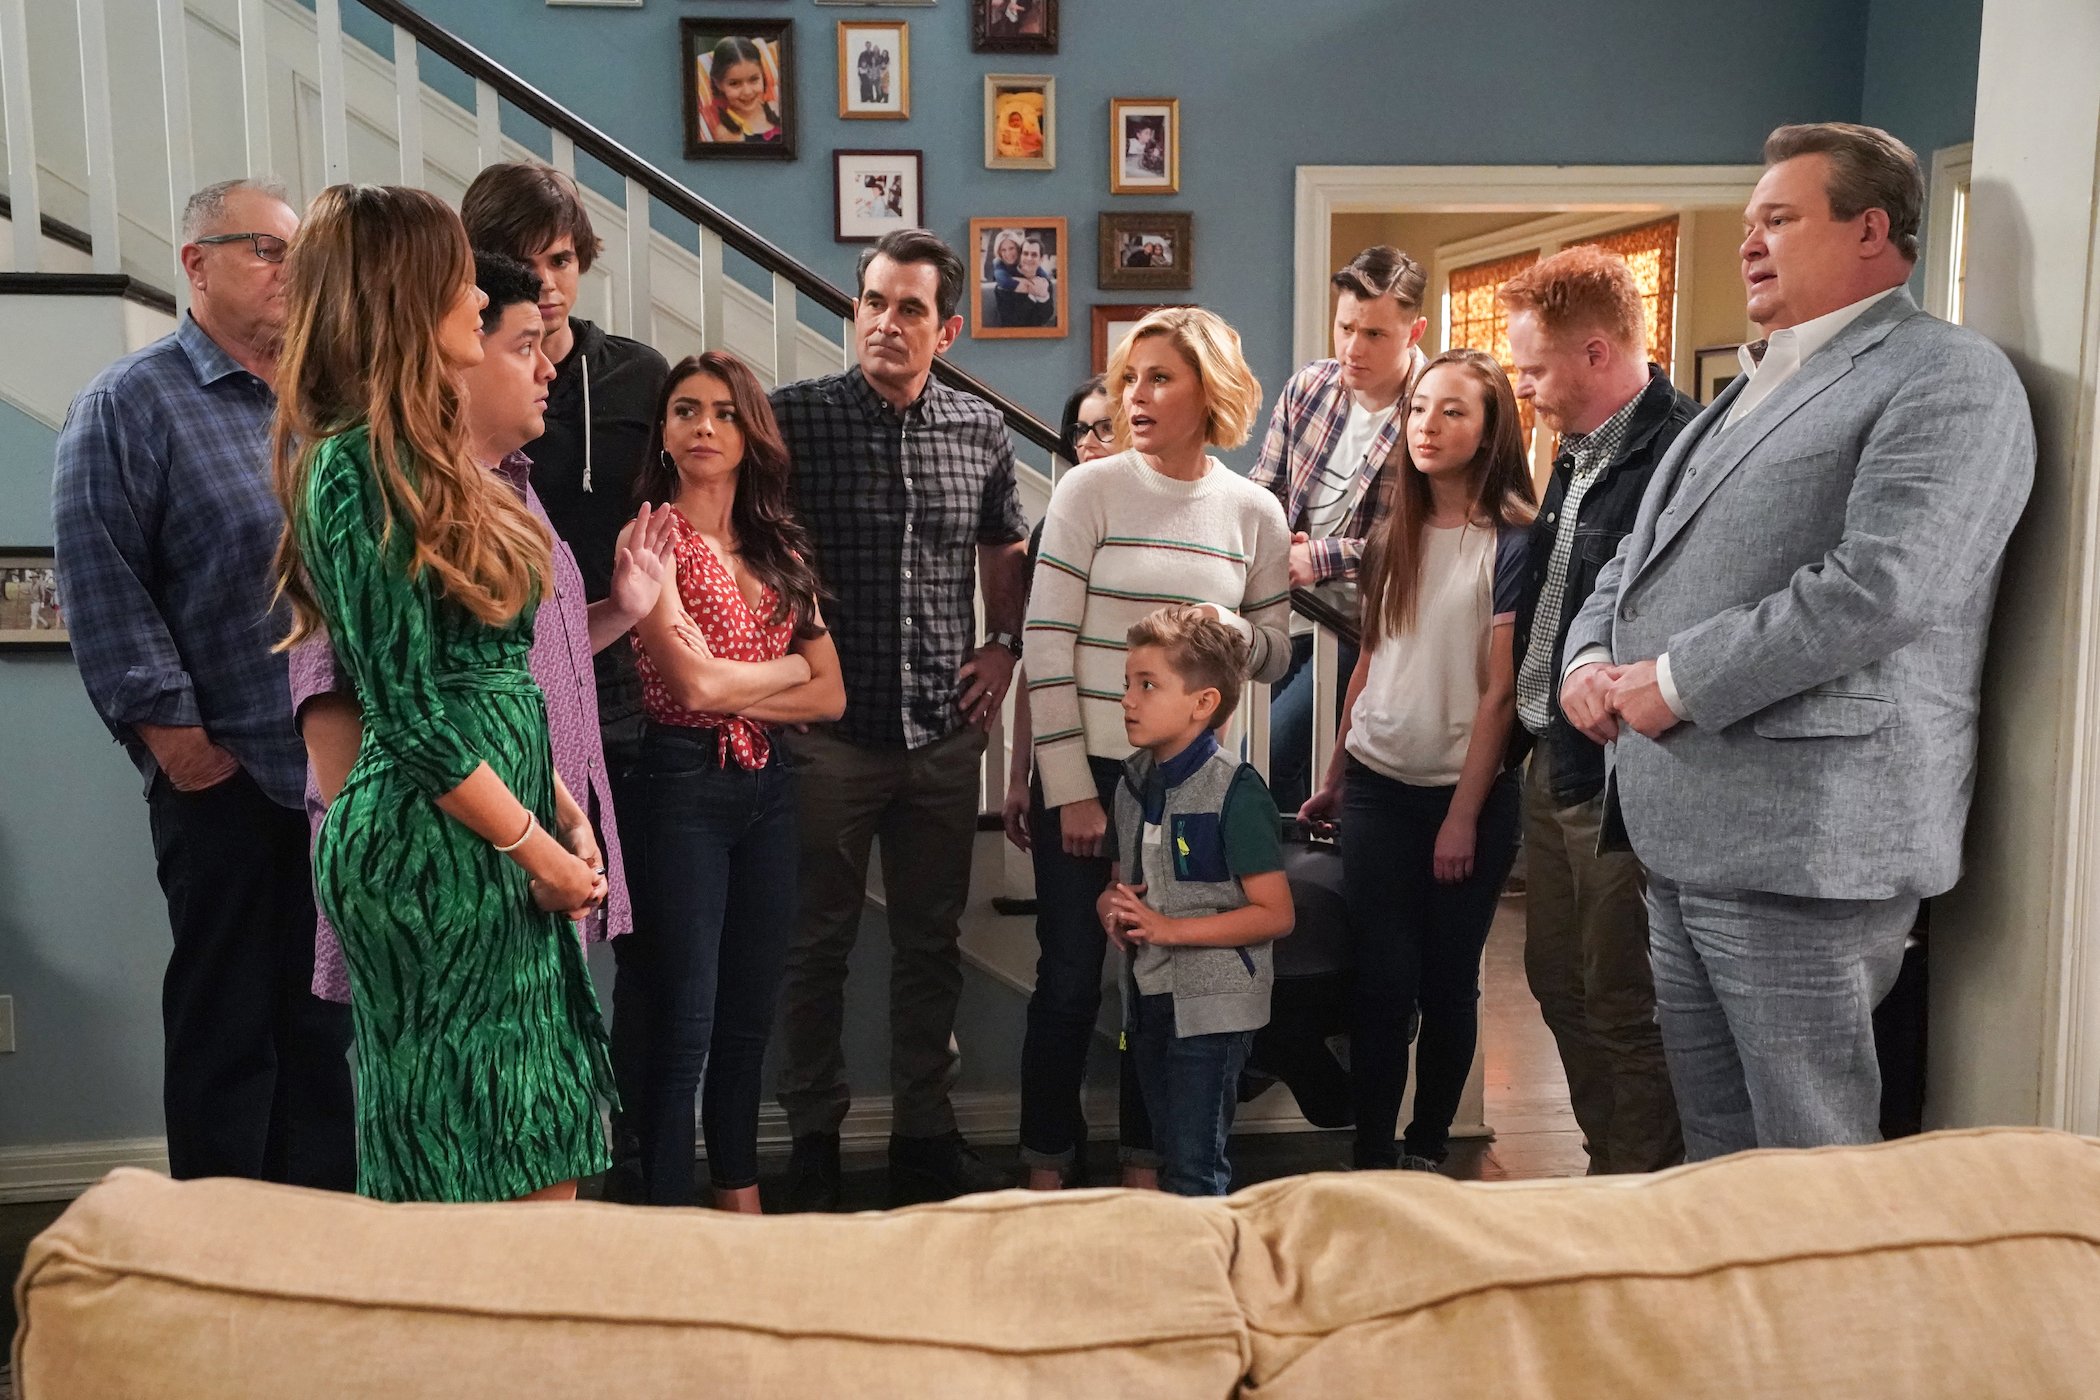 'Modern Family' episodes titled 'Finale Part 1/Finale Part 2' the cast in the Dupnhy house